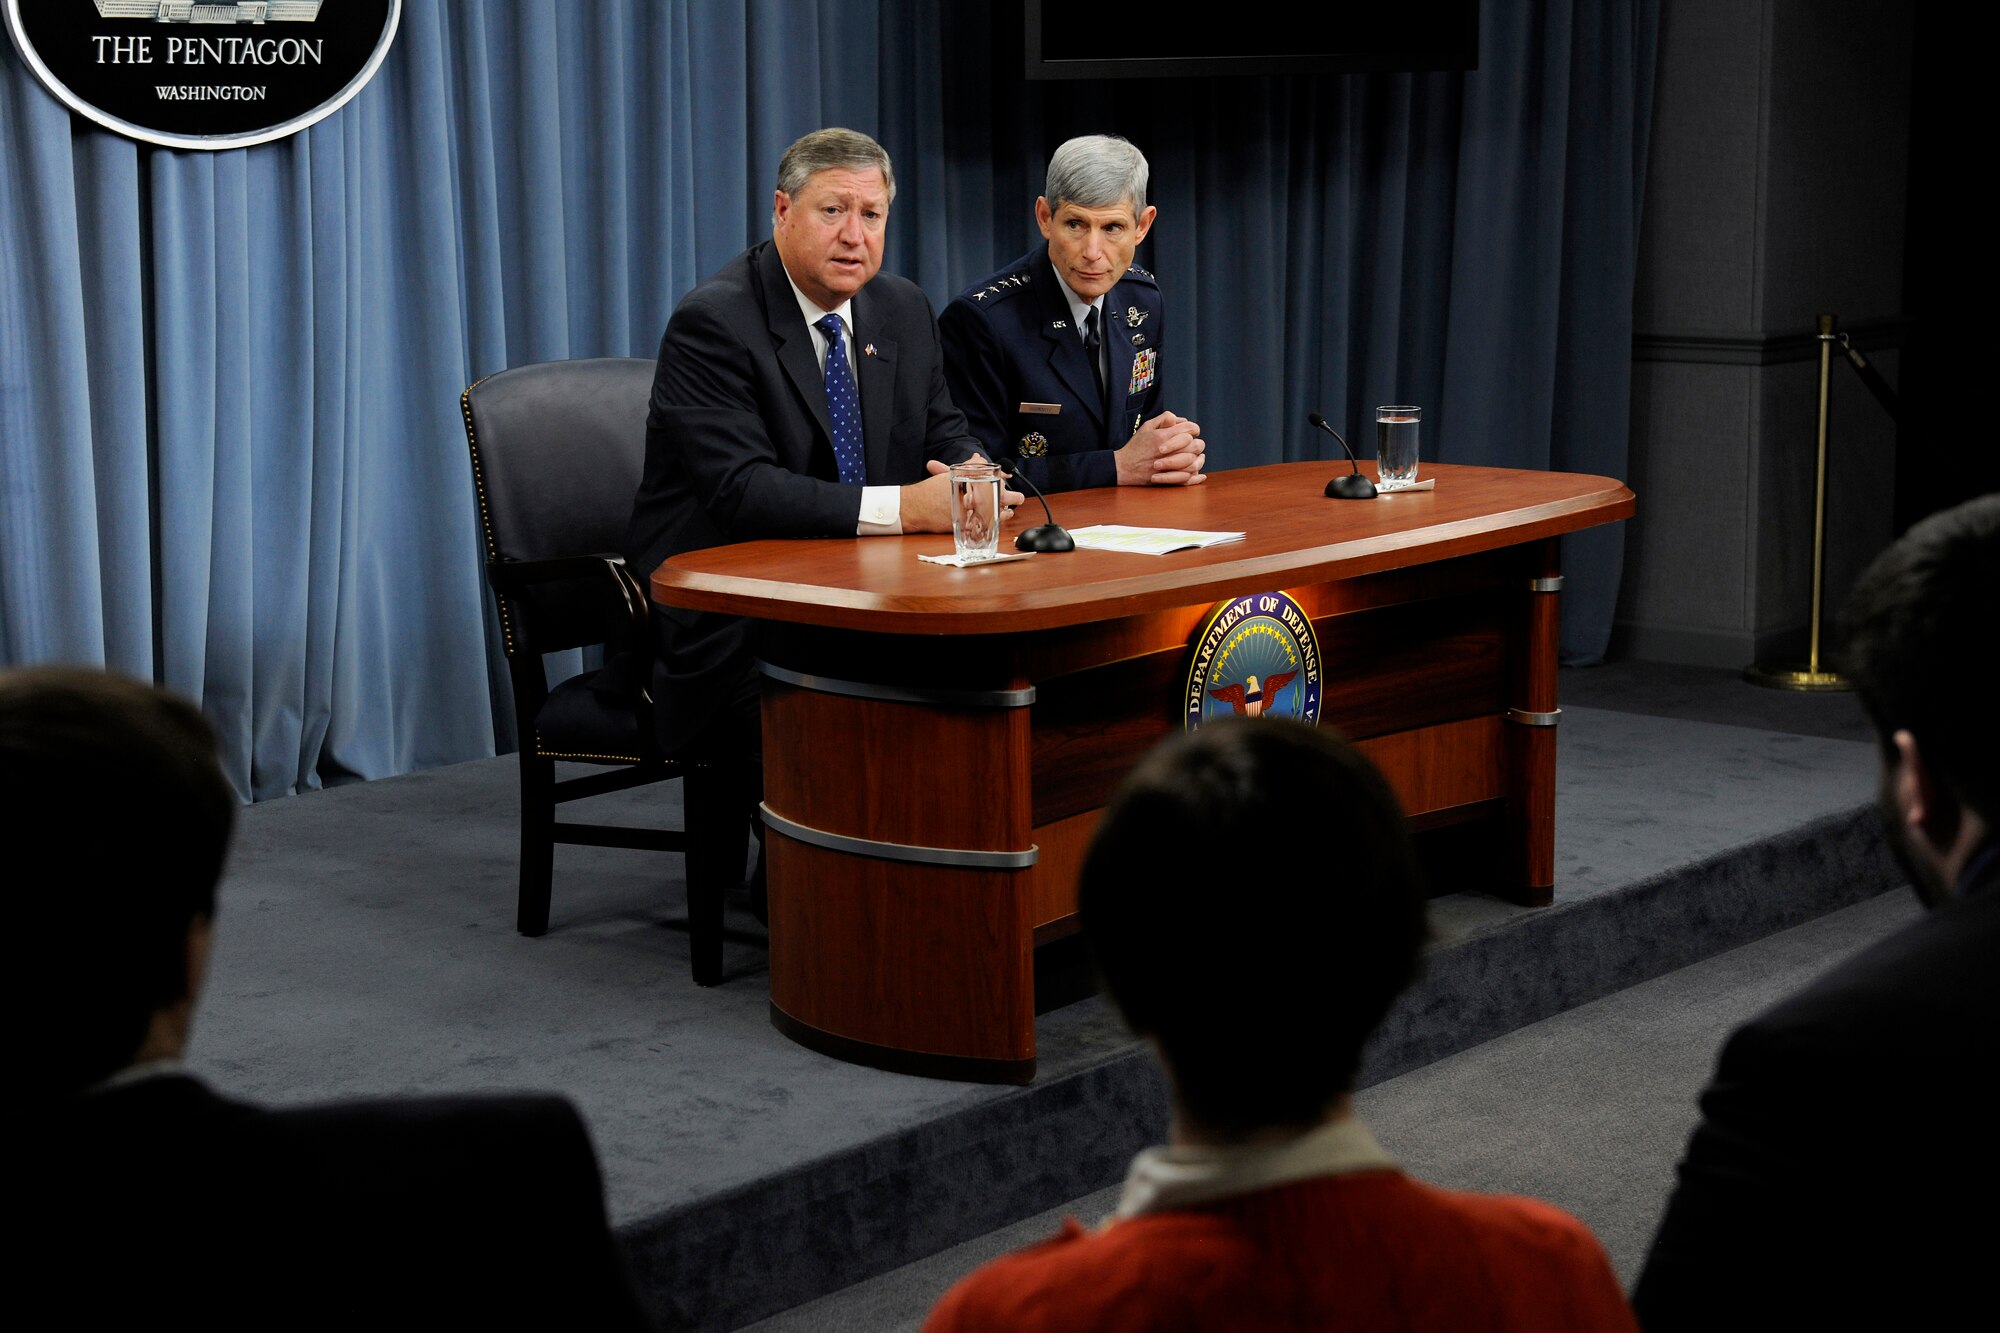 Secretary of the Air Force Michael Donley and Air Force Chief of Staff Gen. Norton Schwartz explain the Air Force's Force Structure overview during a Pentagon press briefing on Feb. 3, 2012.  (U.S. Air Force photo/Scott M. Ash)